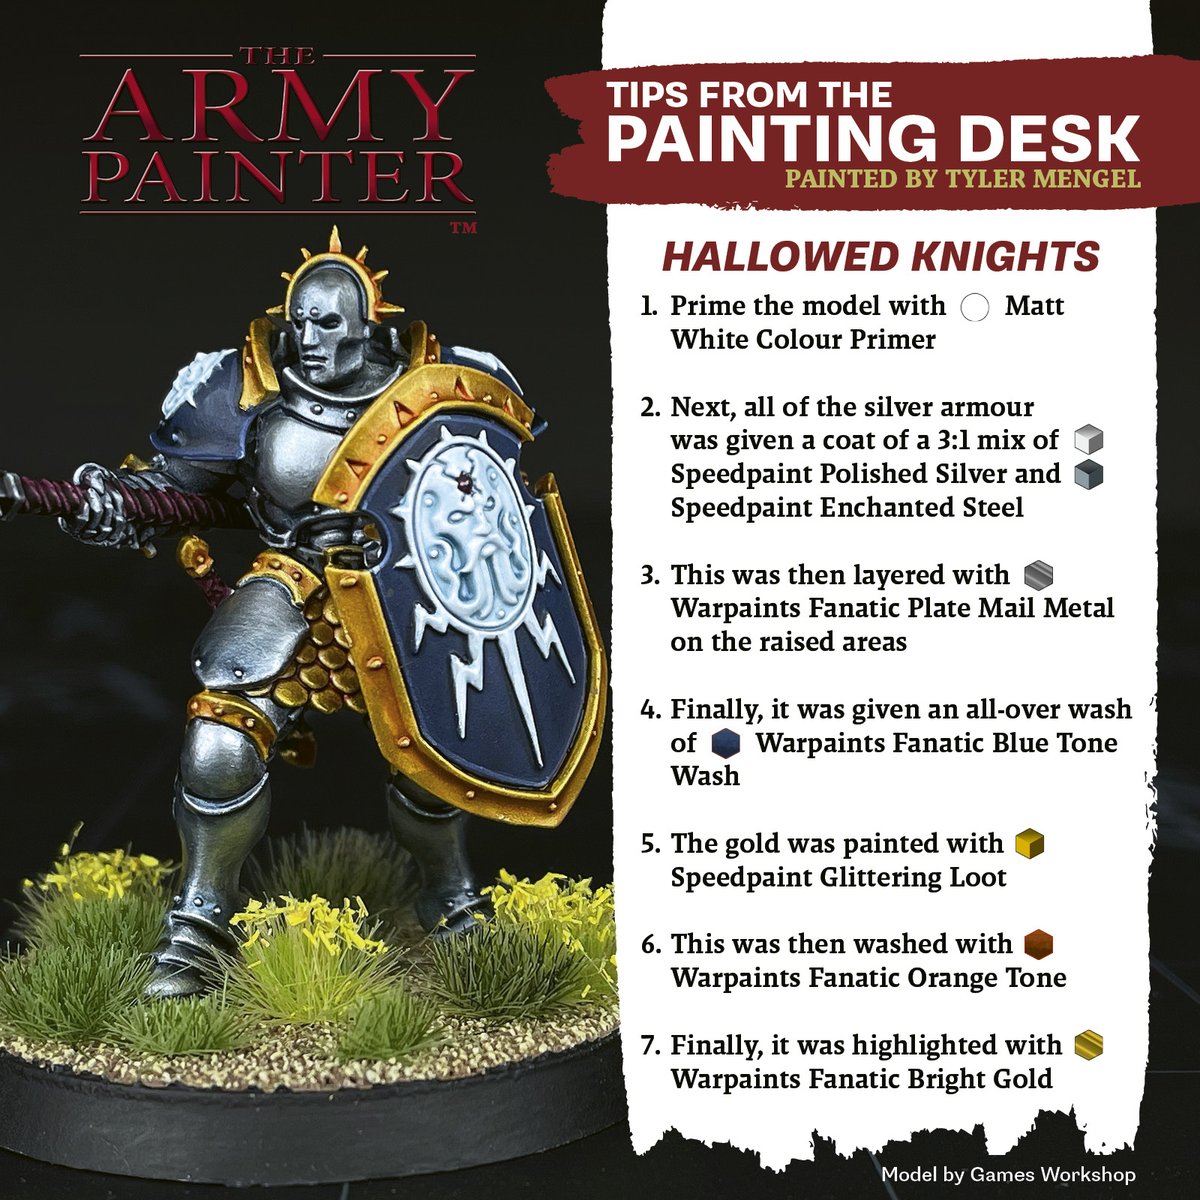 Welcome back to Tips from the Painting Desk with another entry from our Social Media Specialist, Tyler! Gold is so last edition. Find out how to get your Hollowed Knights Stormcast onto the table quickly to take care of that pesky rat problem with this handy tutorial!